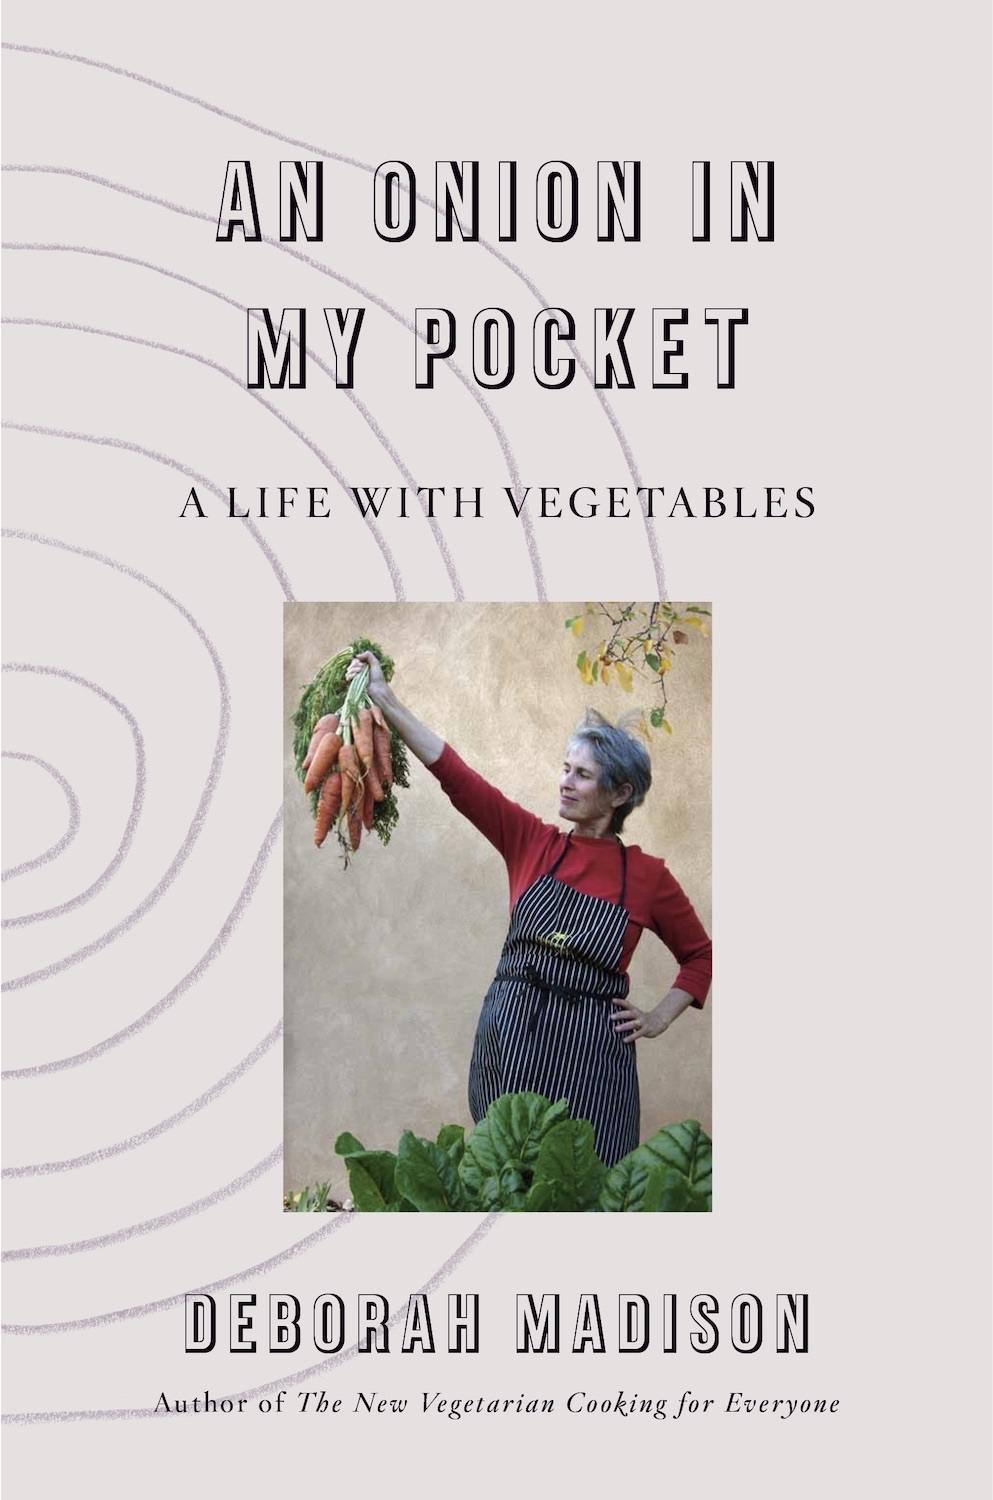 An Onion In My Pocket, A Life With Vegetables cover by Deborah Madison, holding a bunch of carrots and wearing a black and white striped apron. November 2020